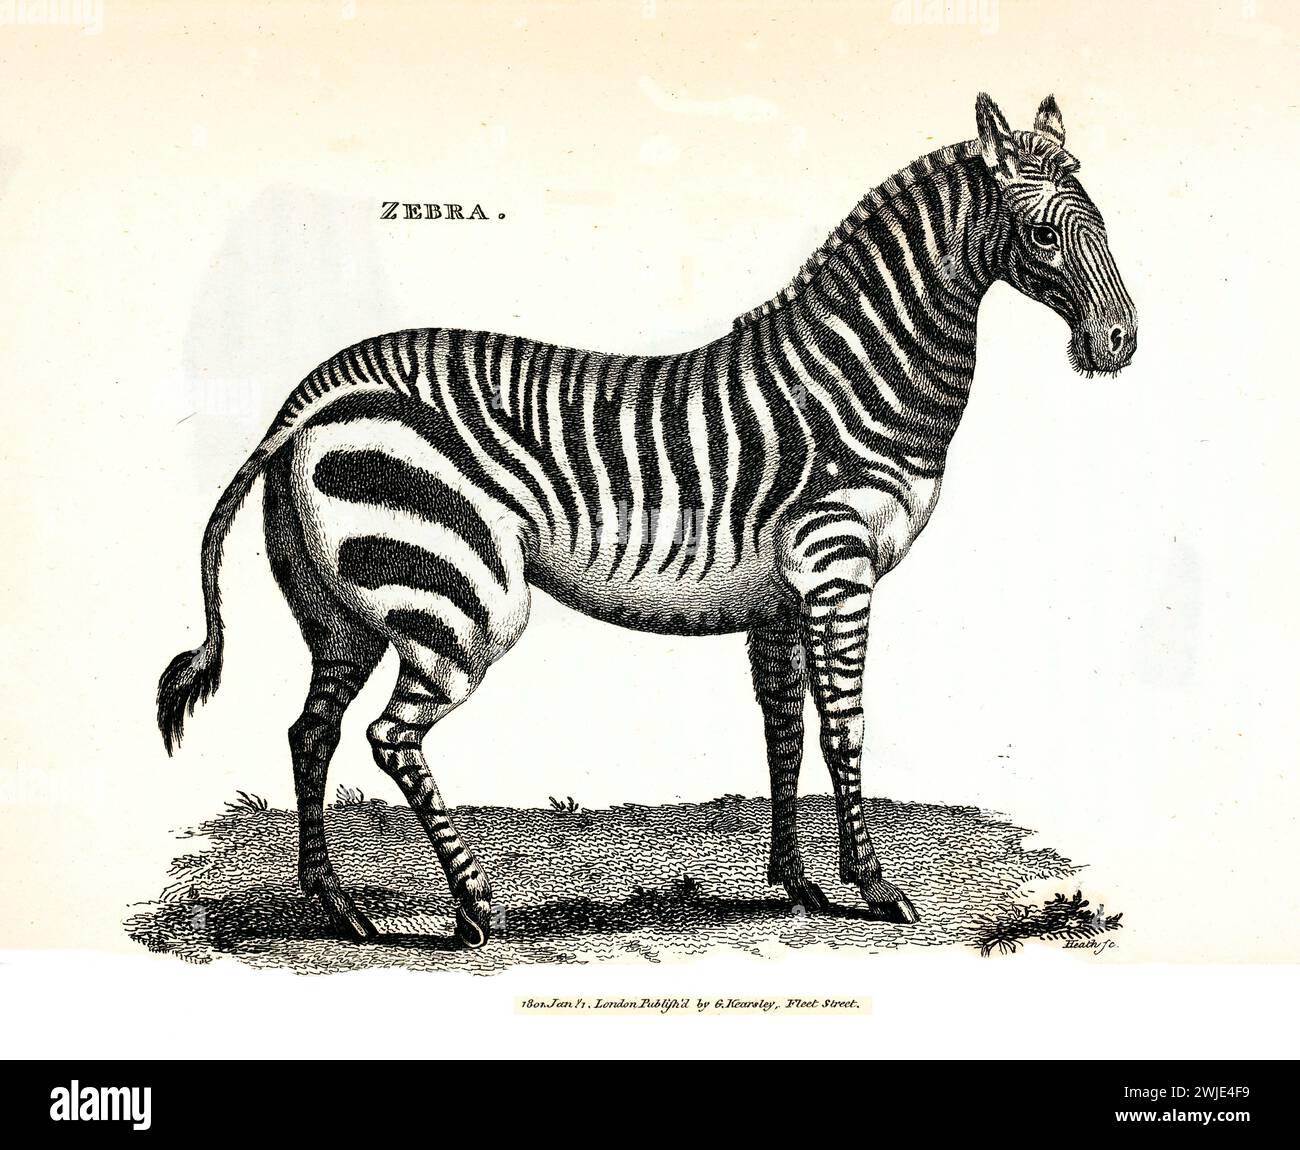 Old engraved illustration of Zebra. Created by George Shaw, published in Zoological Lectures, London, 1809. Stock Photo